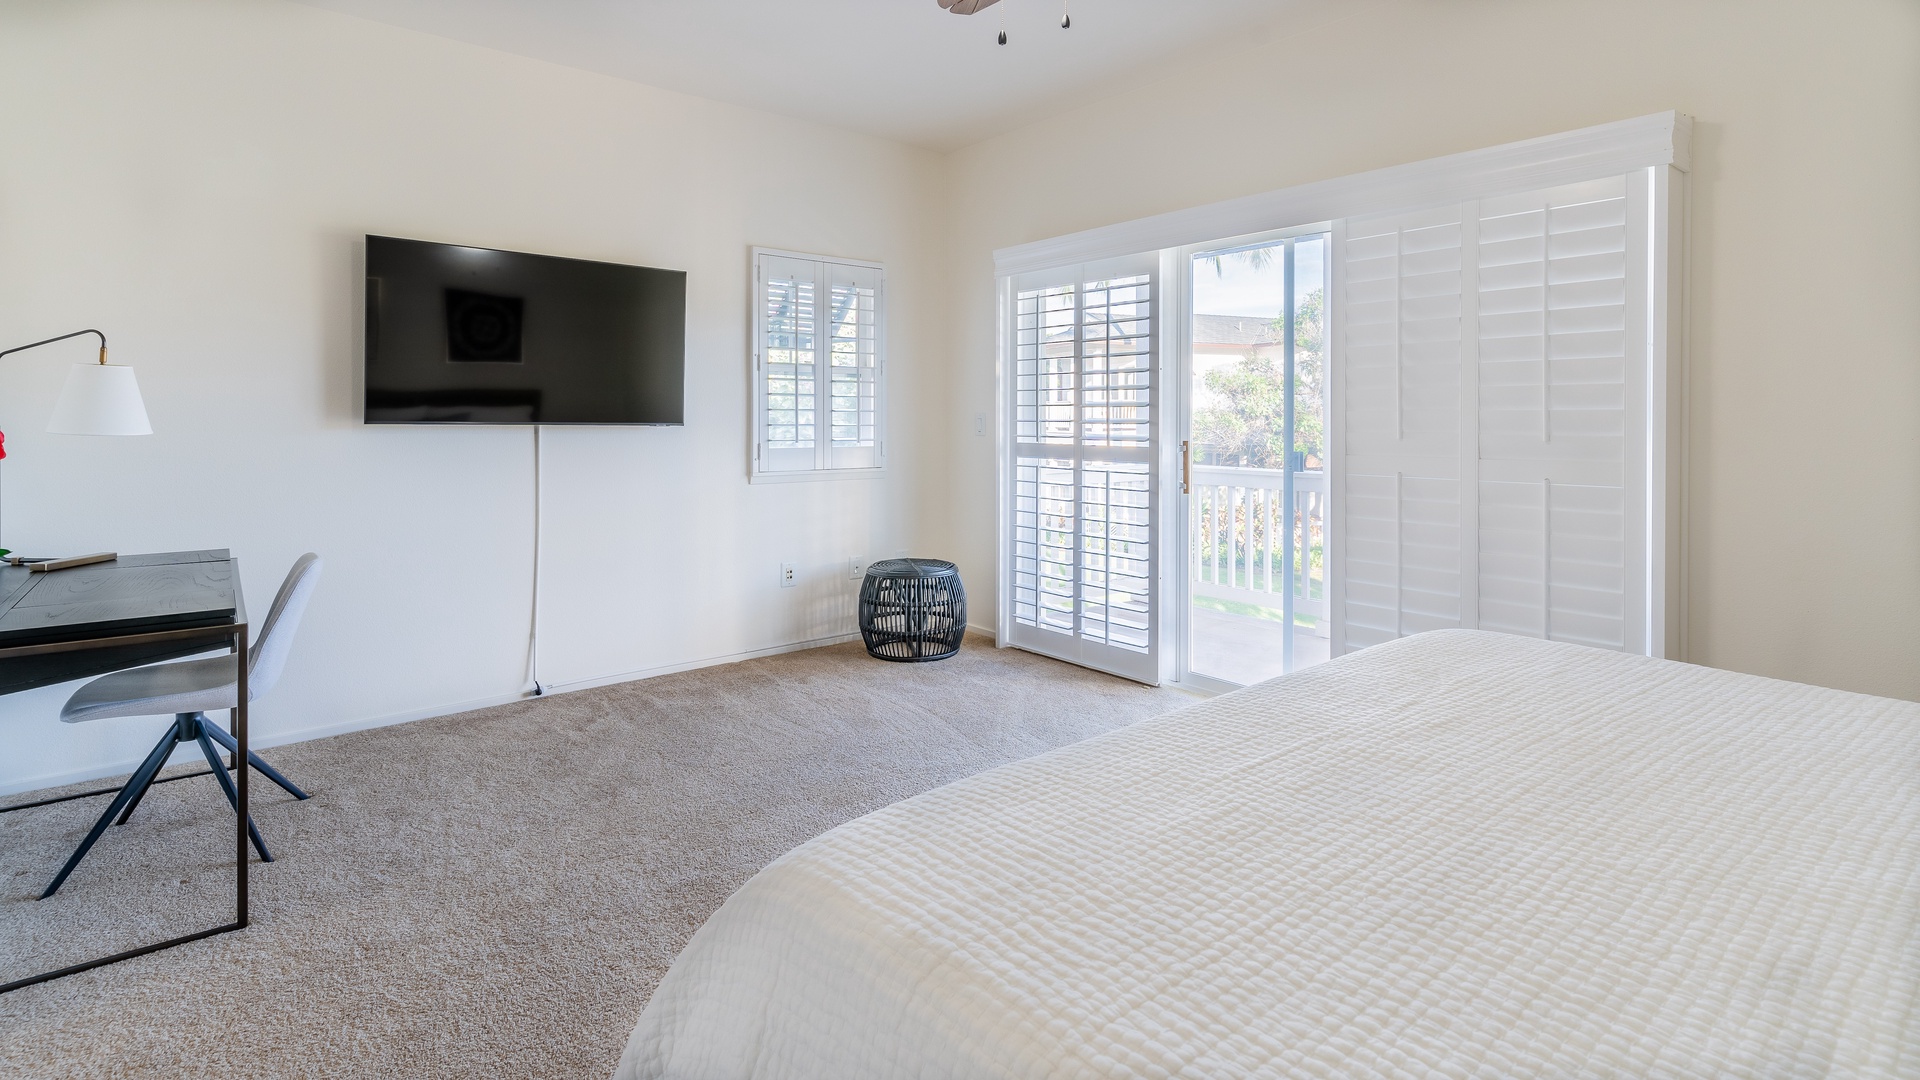 Kapolei Vacation Rentals, Coconut Plantation 1158-1 - The primary guest bedroom featuring a TV, sliding glass door and walk-in closet space.